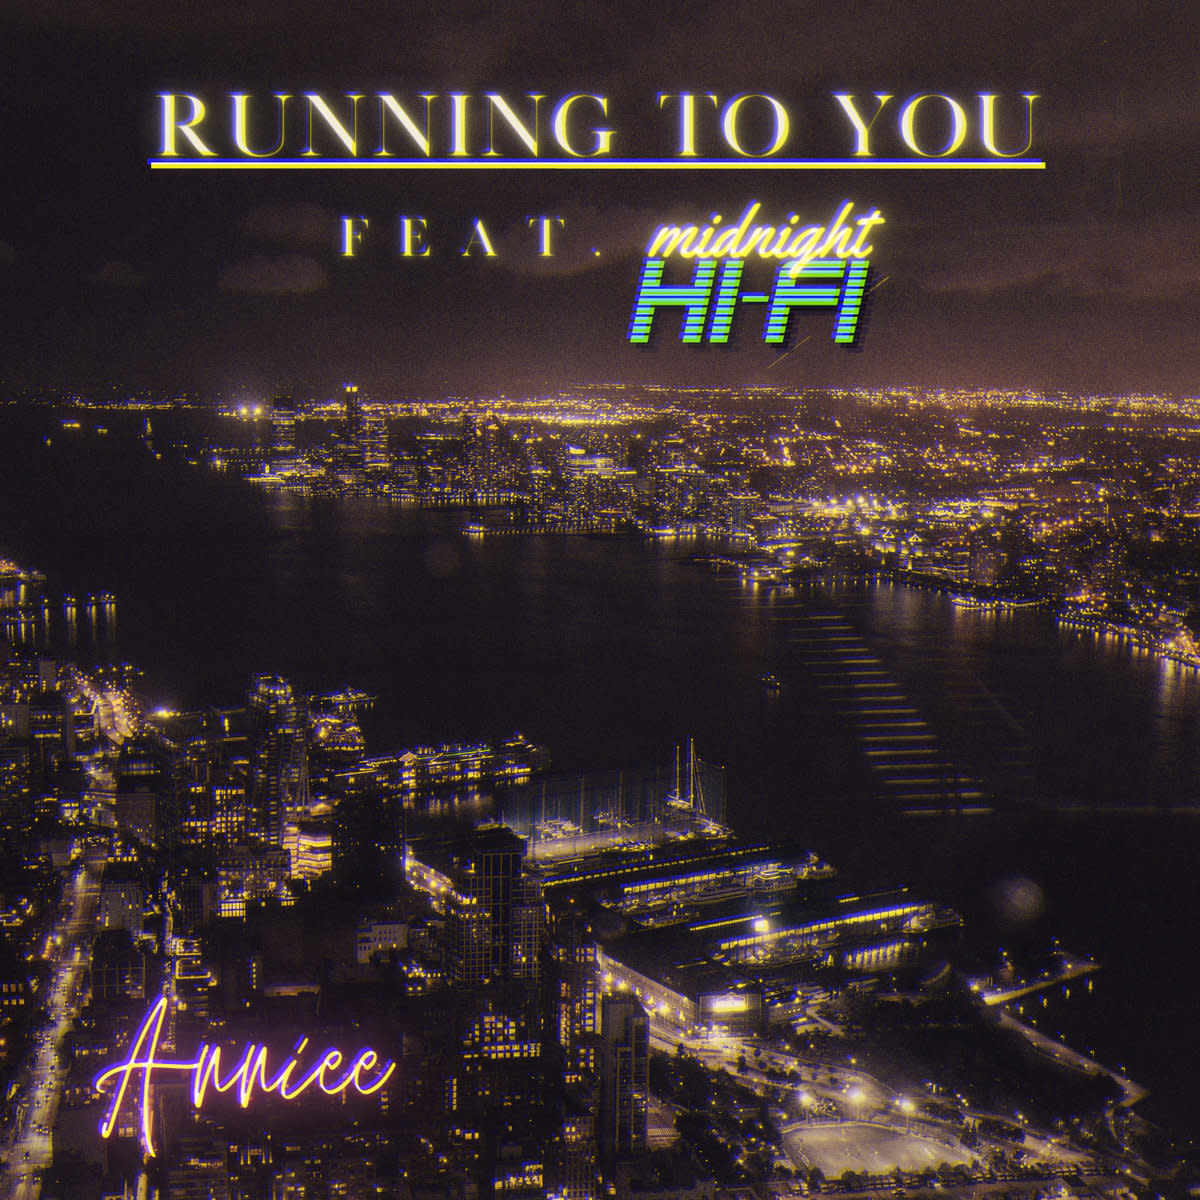 synth-single-review-running-to-you-by-anniee-and-midnight-hi-fi